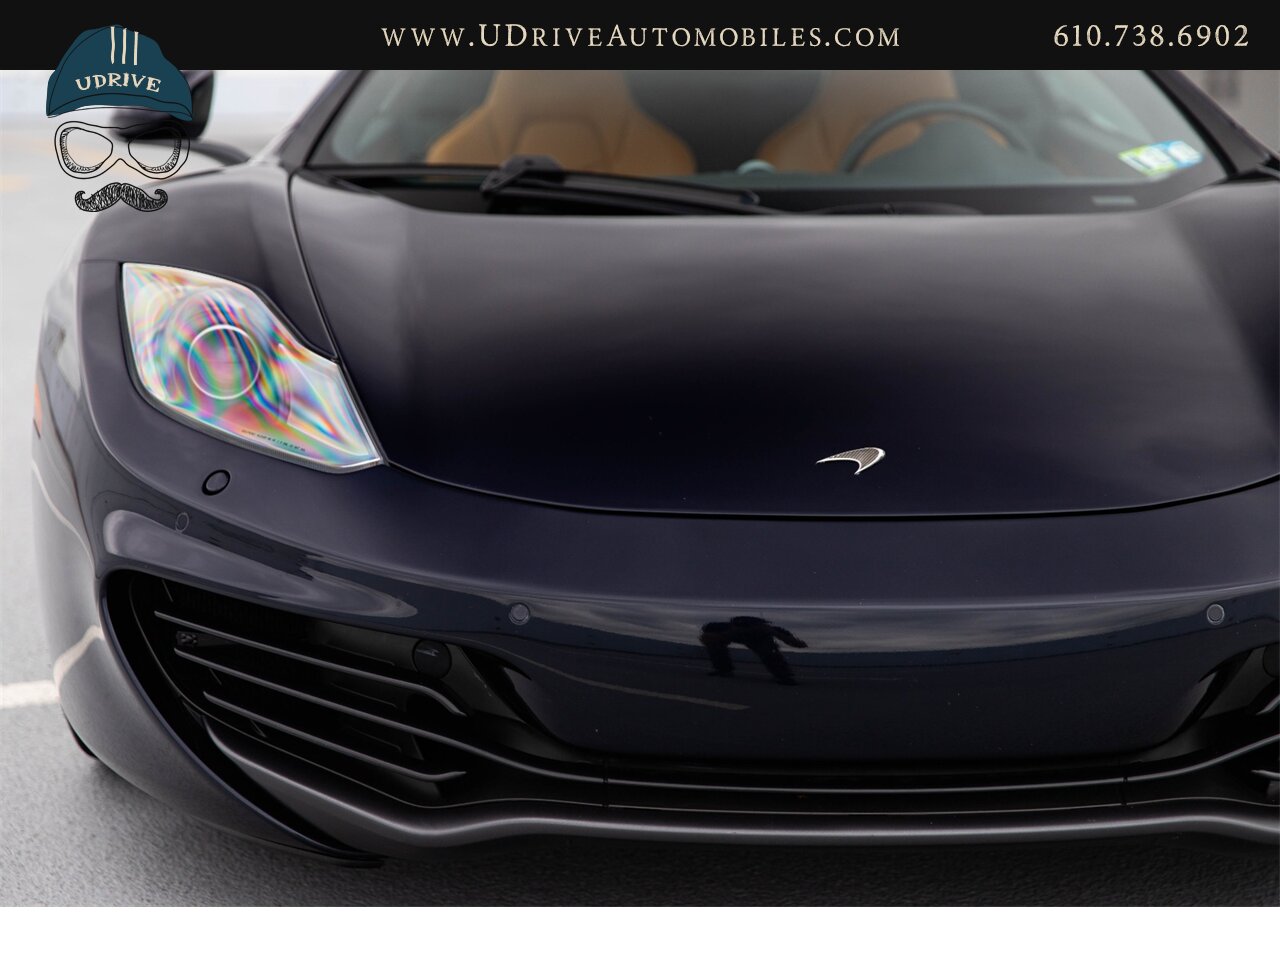 2013 McLaren MP4-12C Spider 1 Owner 6k Miles Carbon Fiber Full Leather  Sapphire Black over Natural Tan Leather - Photo 13 - West Chester, PA 19382